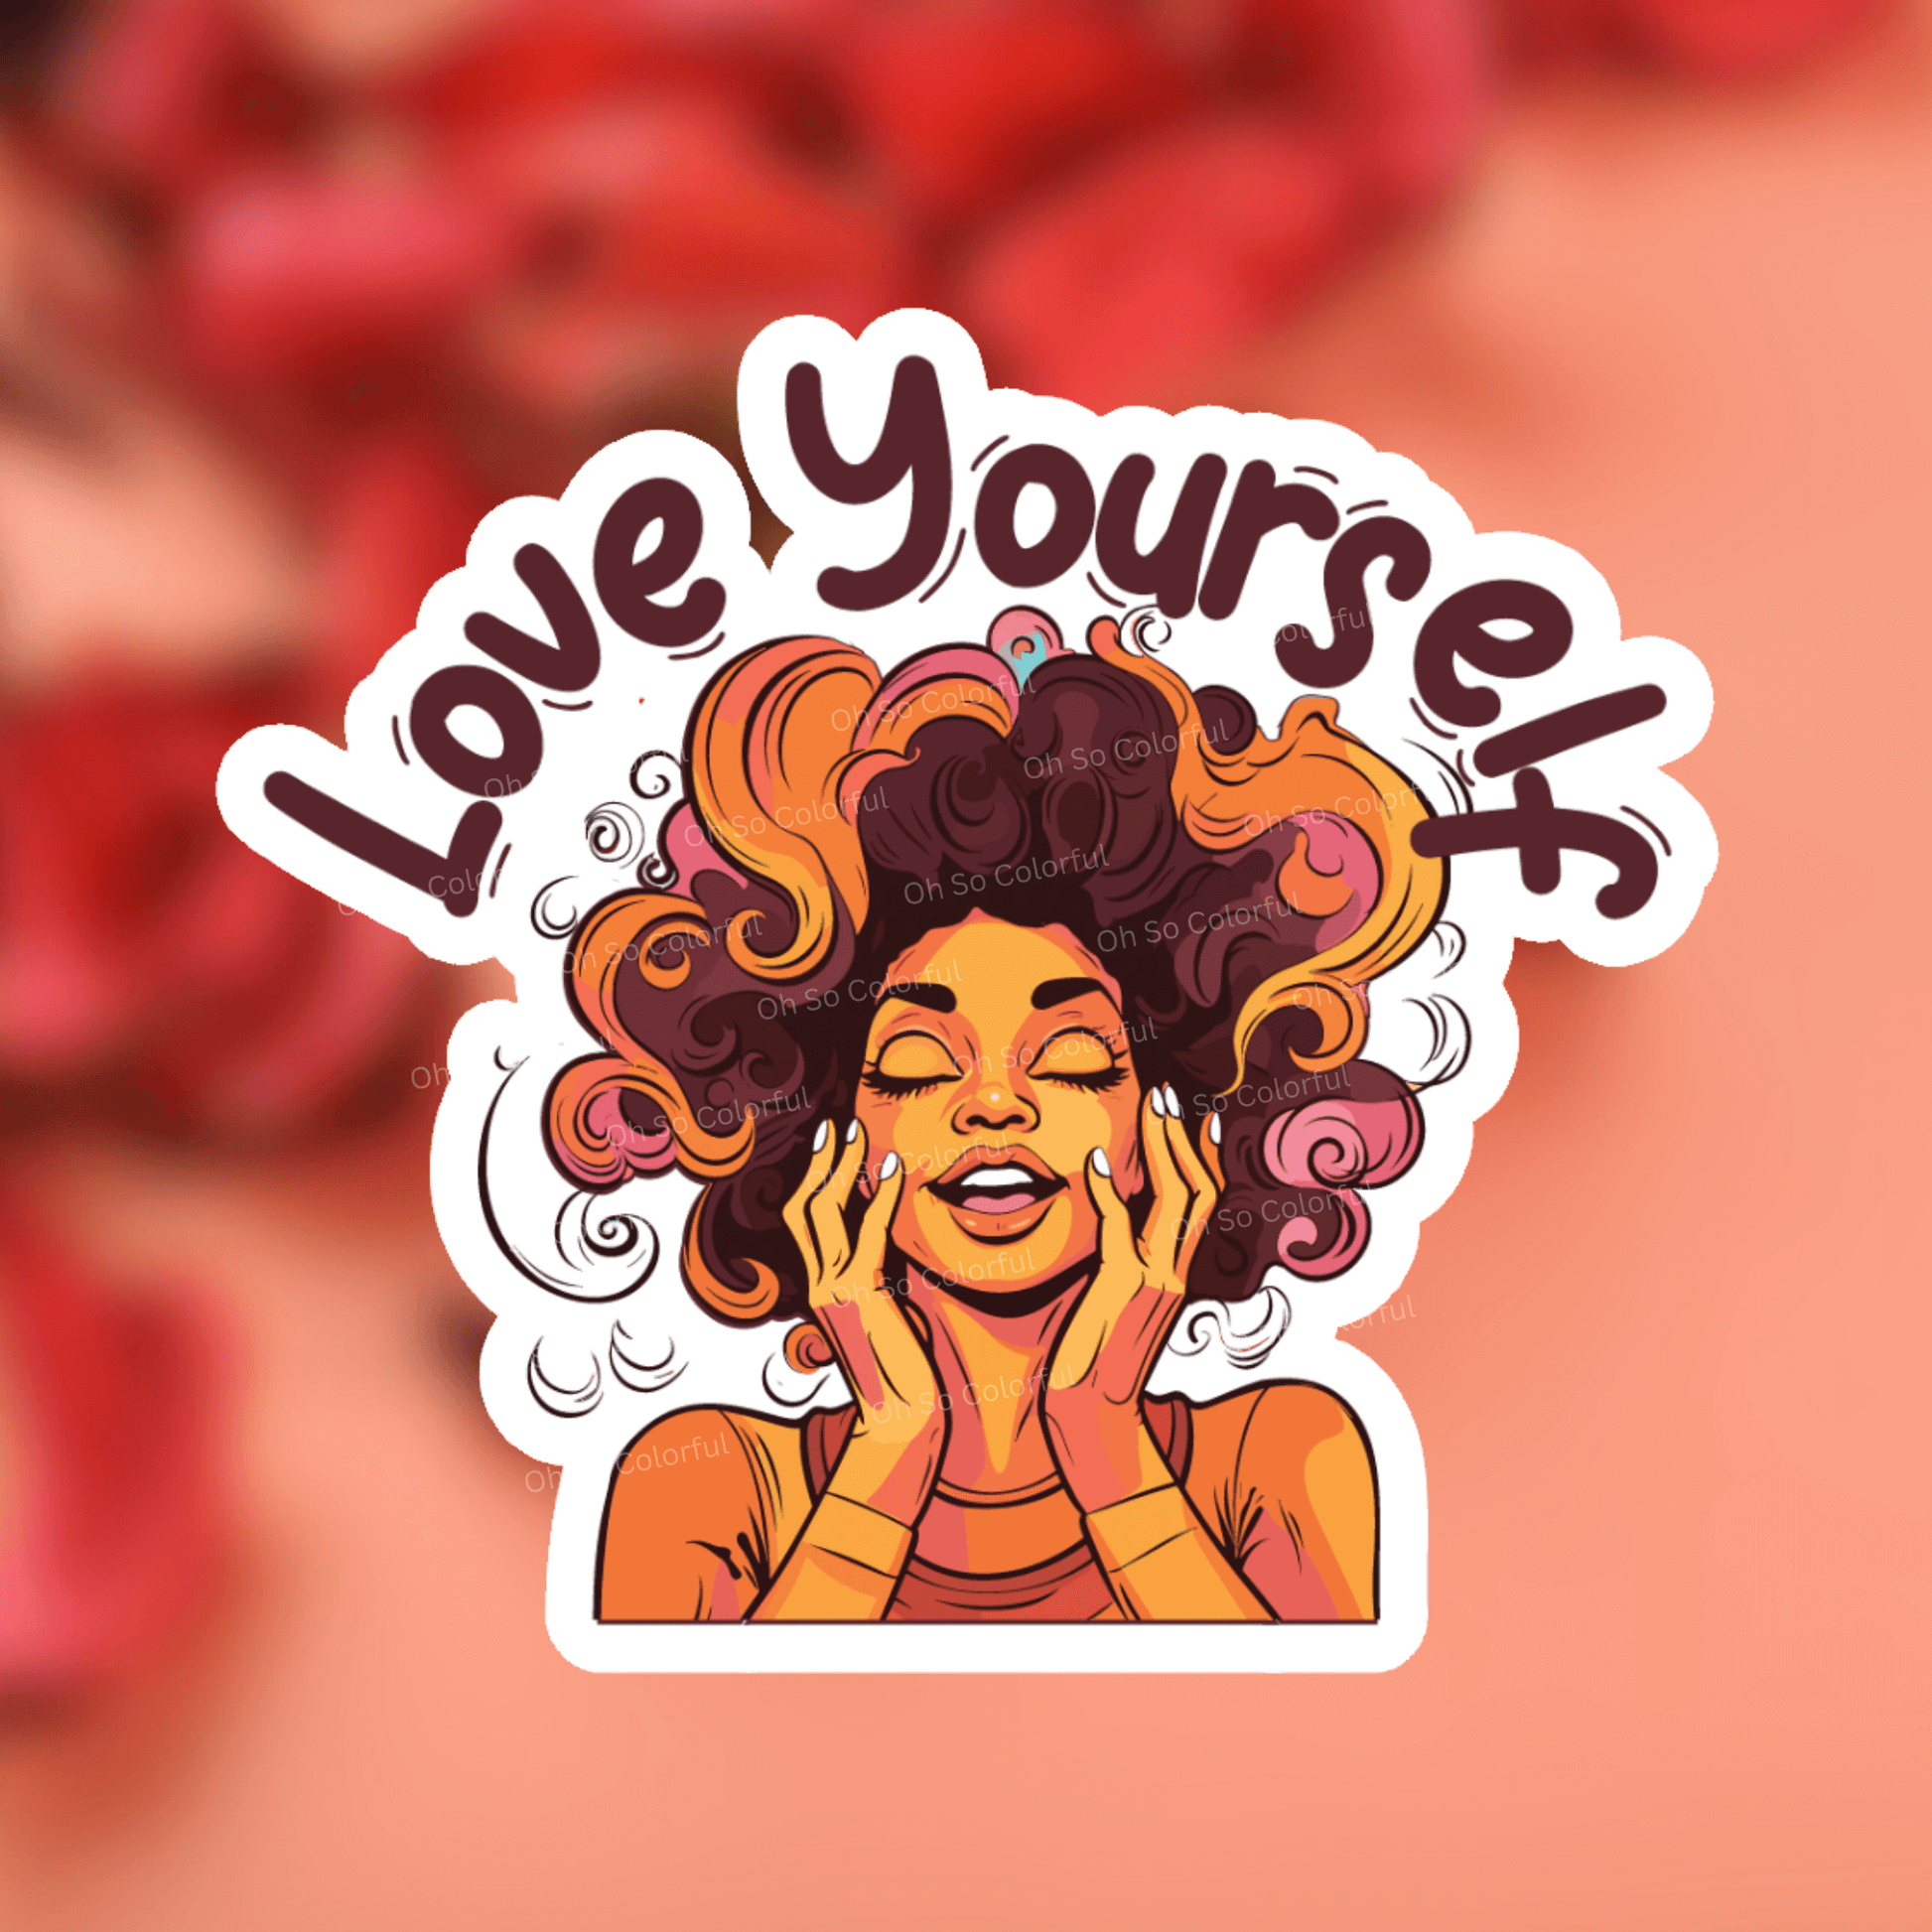 Positive Affirmation Stickers - Motivational Stickers for Laptops,  Tumblers, Notebooks and More! Self Care, Self Love